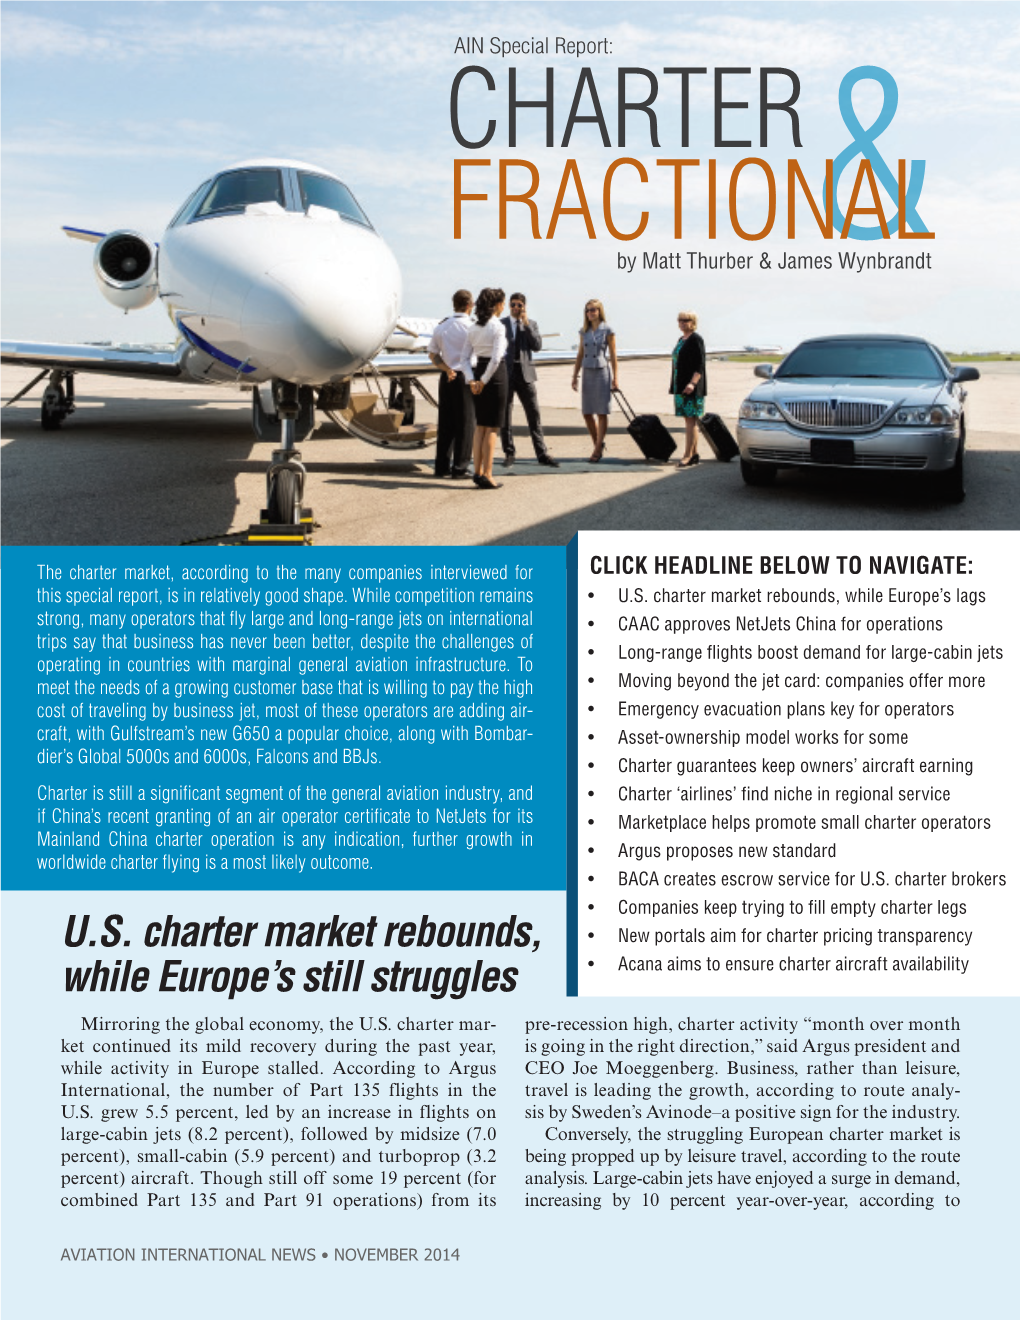 Charter Market, According to the Many Companies Interviewed for CLICK HEADLINE BELOW to NAVIGATE: This Special Report, Is in Relatively Good Shape